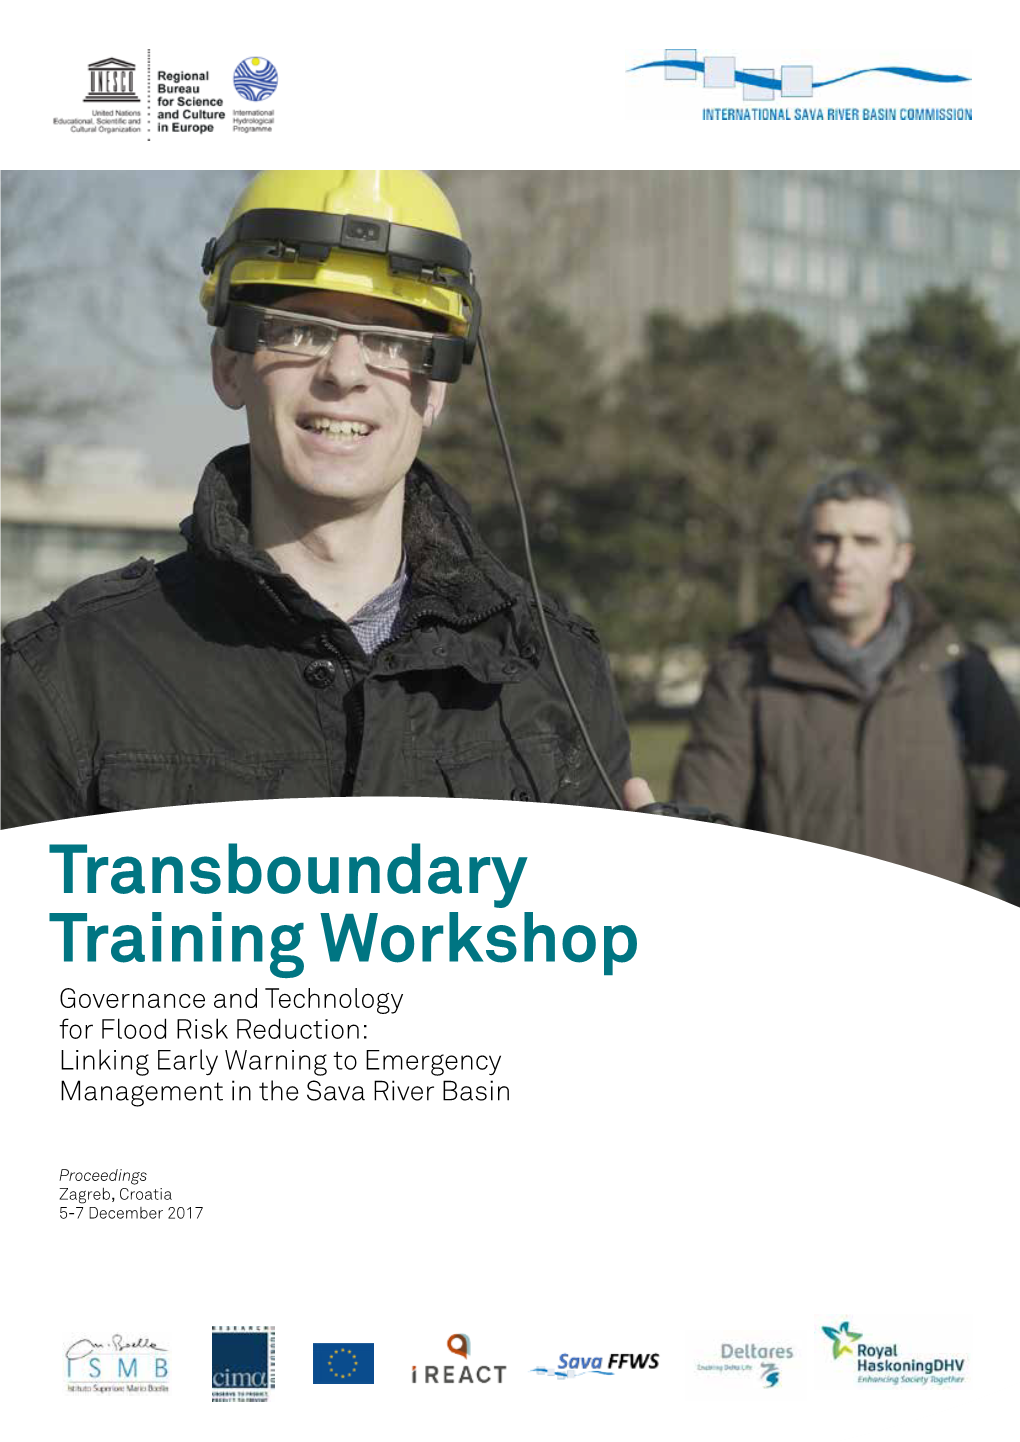 Proceedings from the Transboundary Training Workshop on Governance